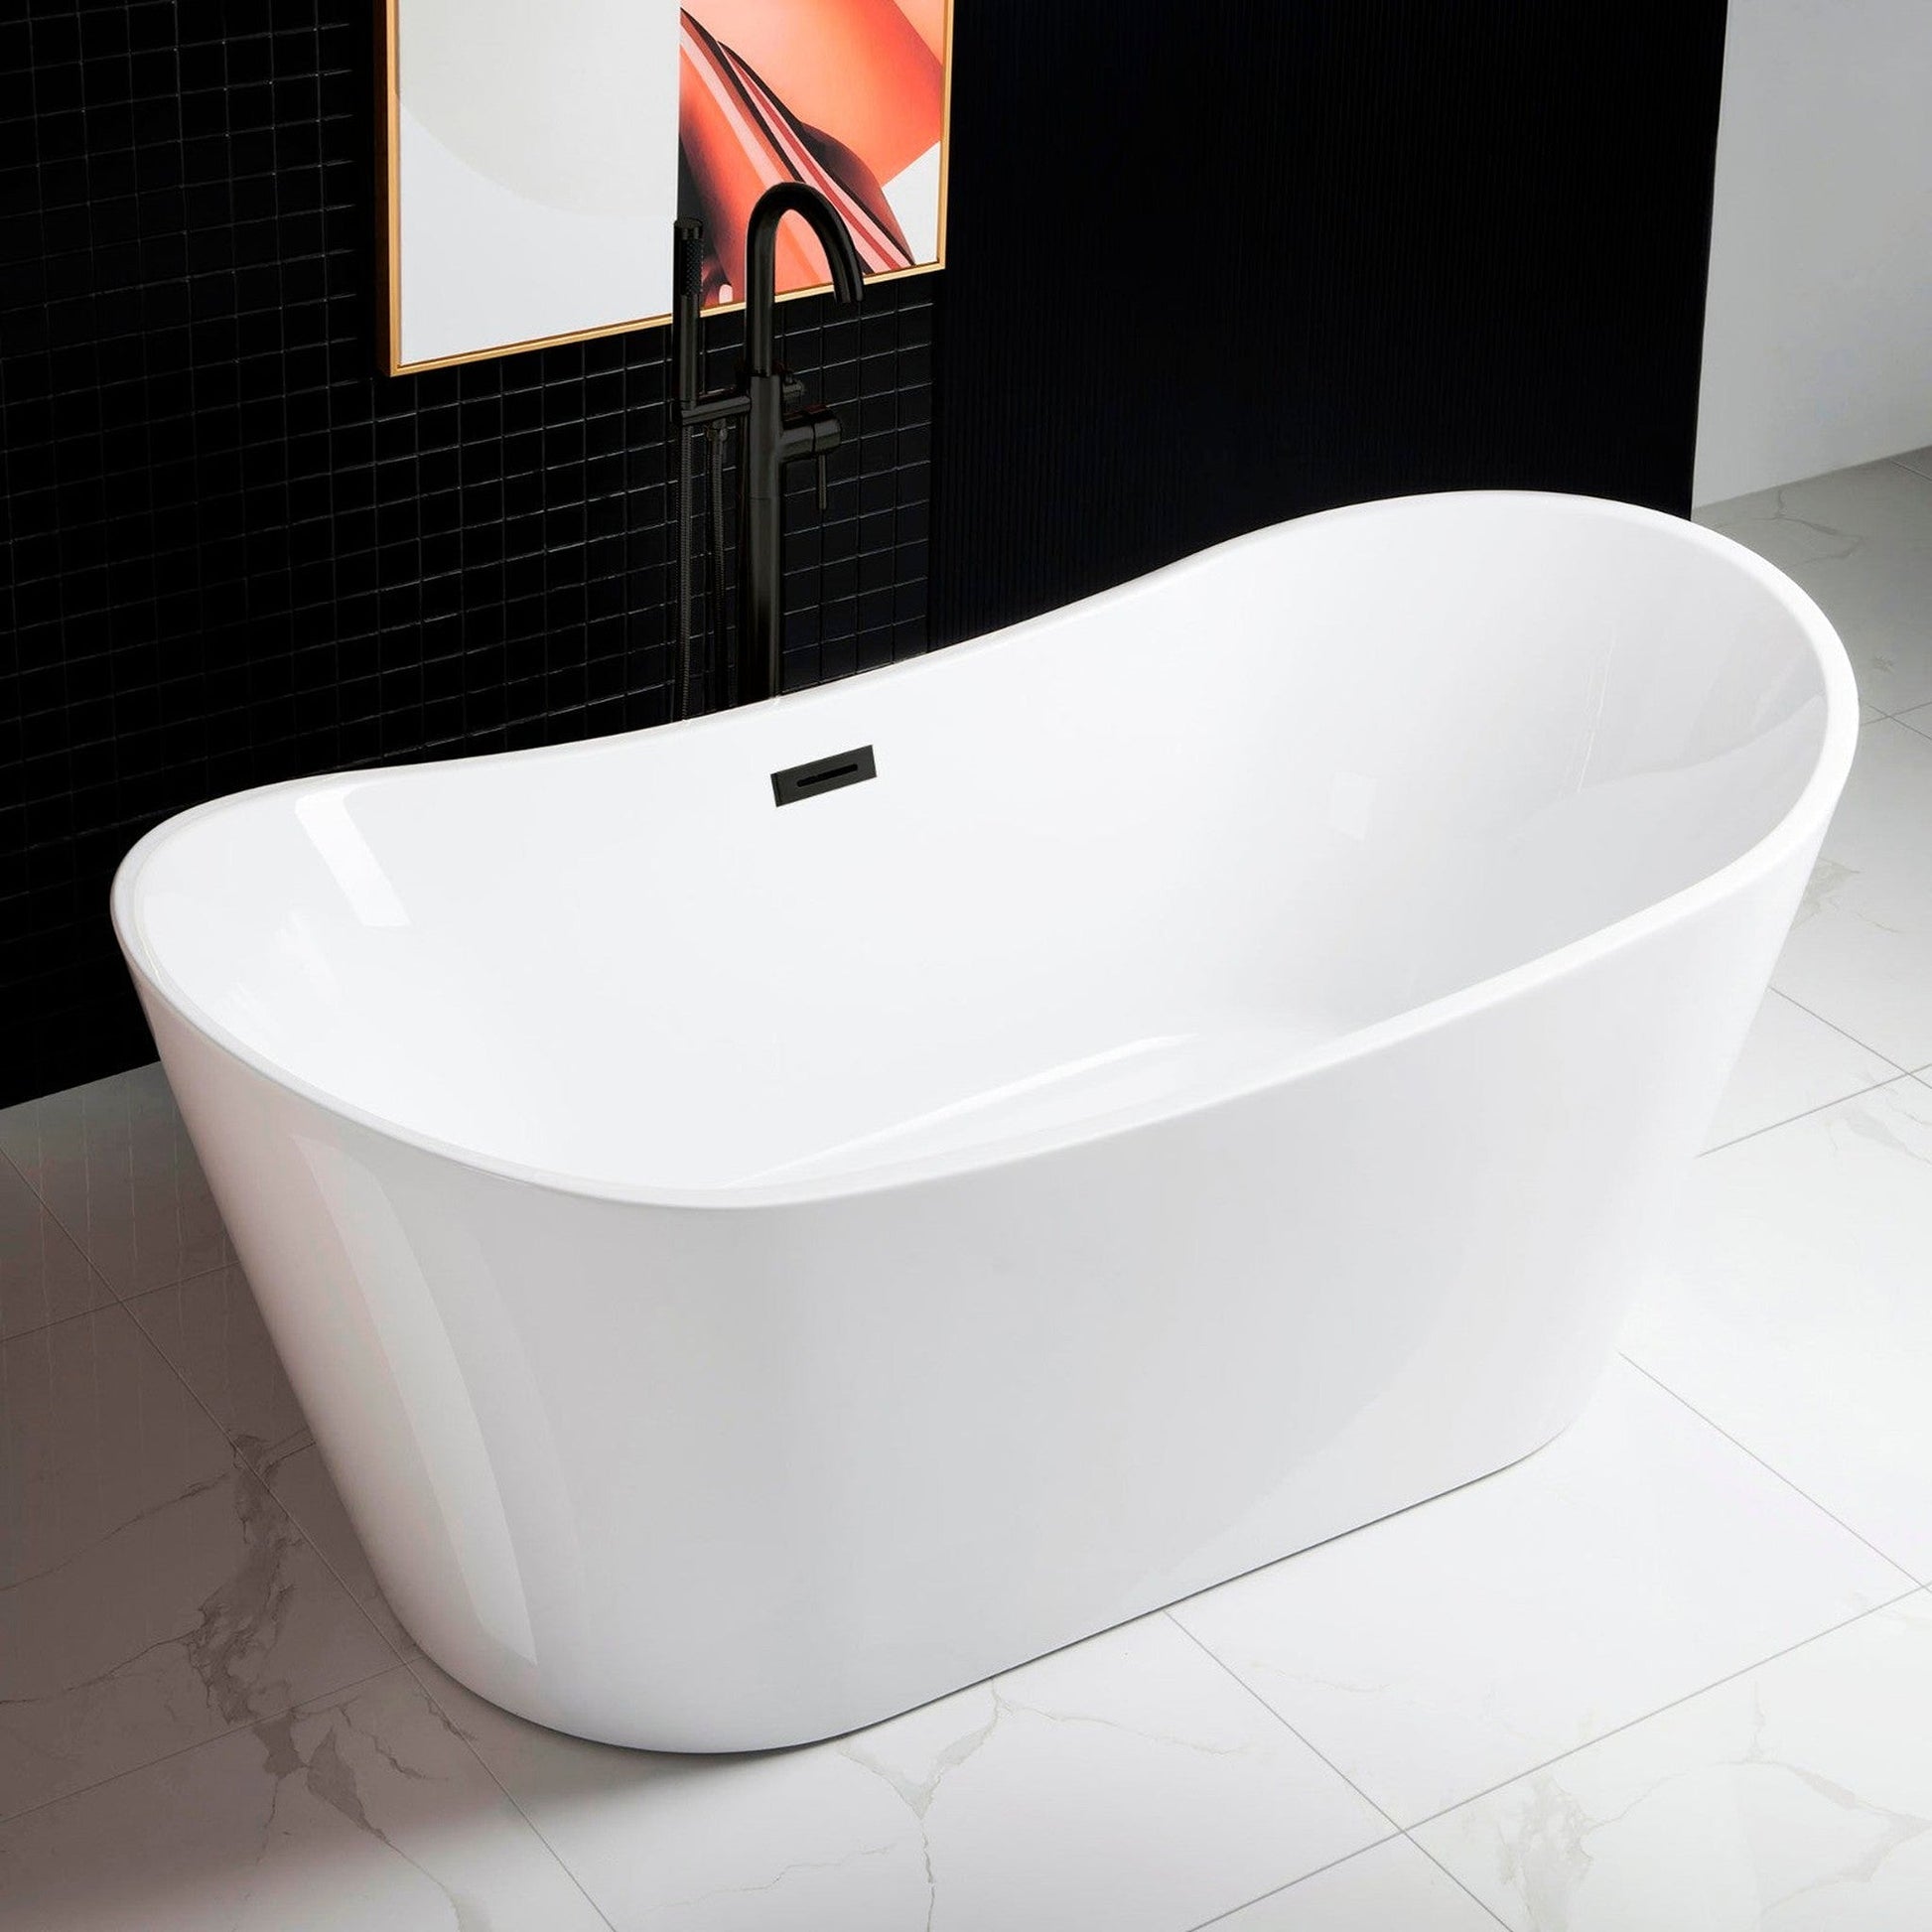 WoodBridge B0010 67" White Acrylic Freestanding Contemporary Soaking Bathtub With Matte Black Drain, Overflow, F0072MBRD Tub Filler and Caddy Tray